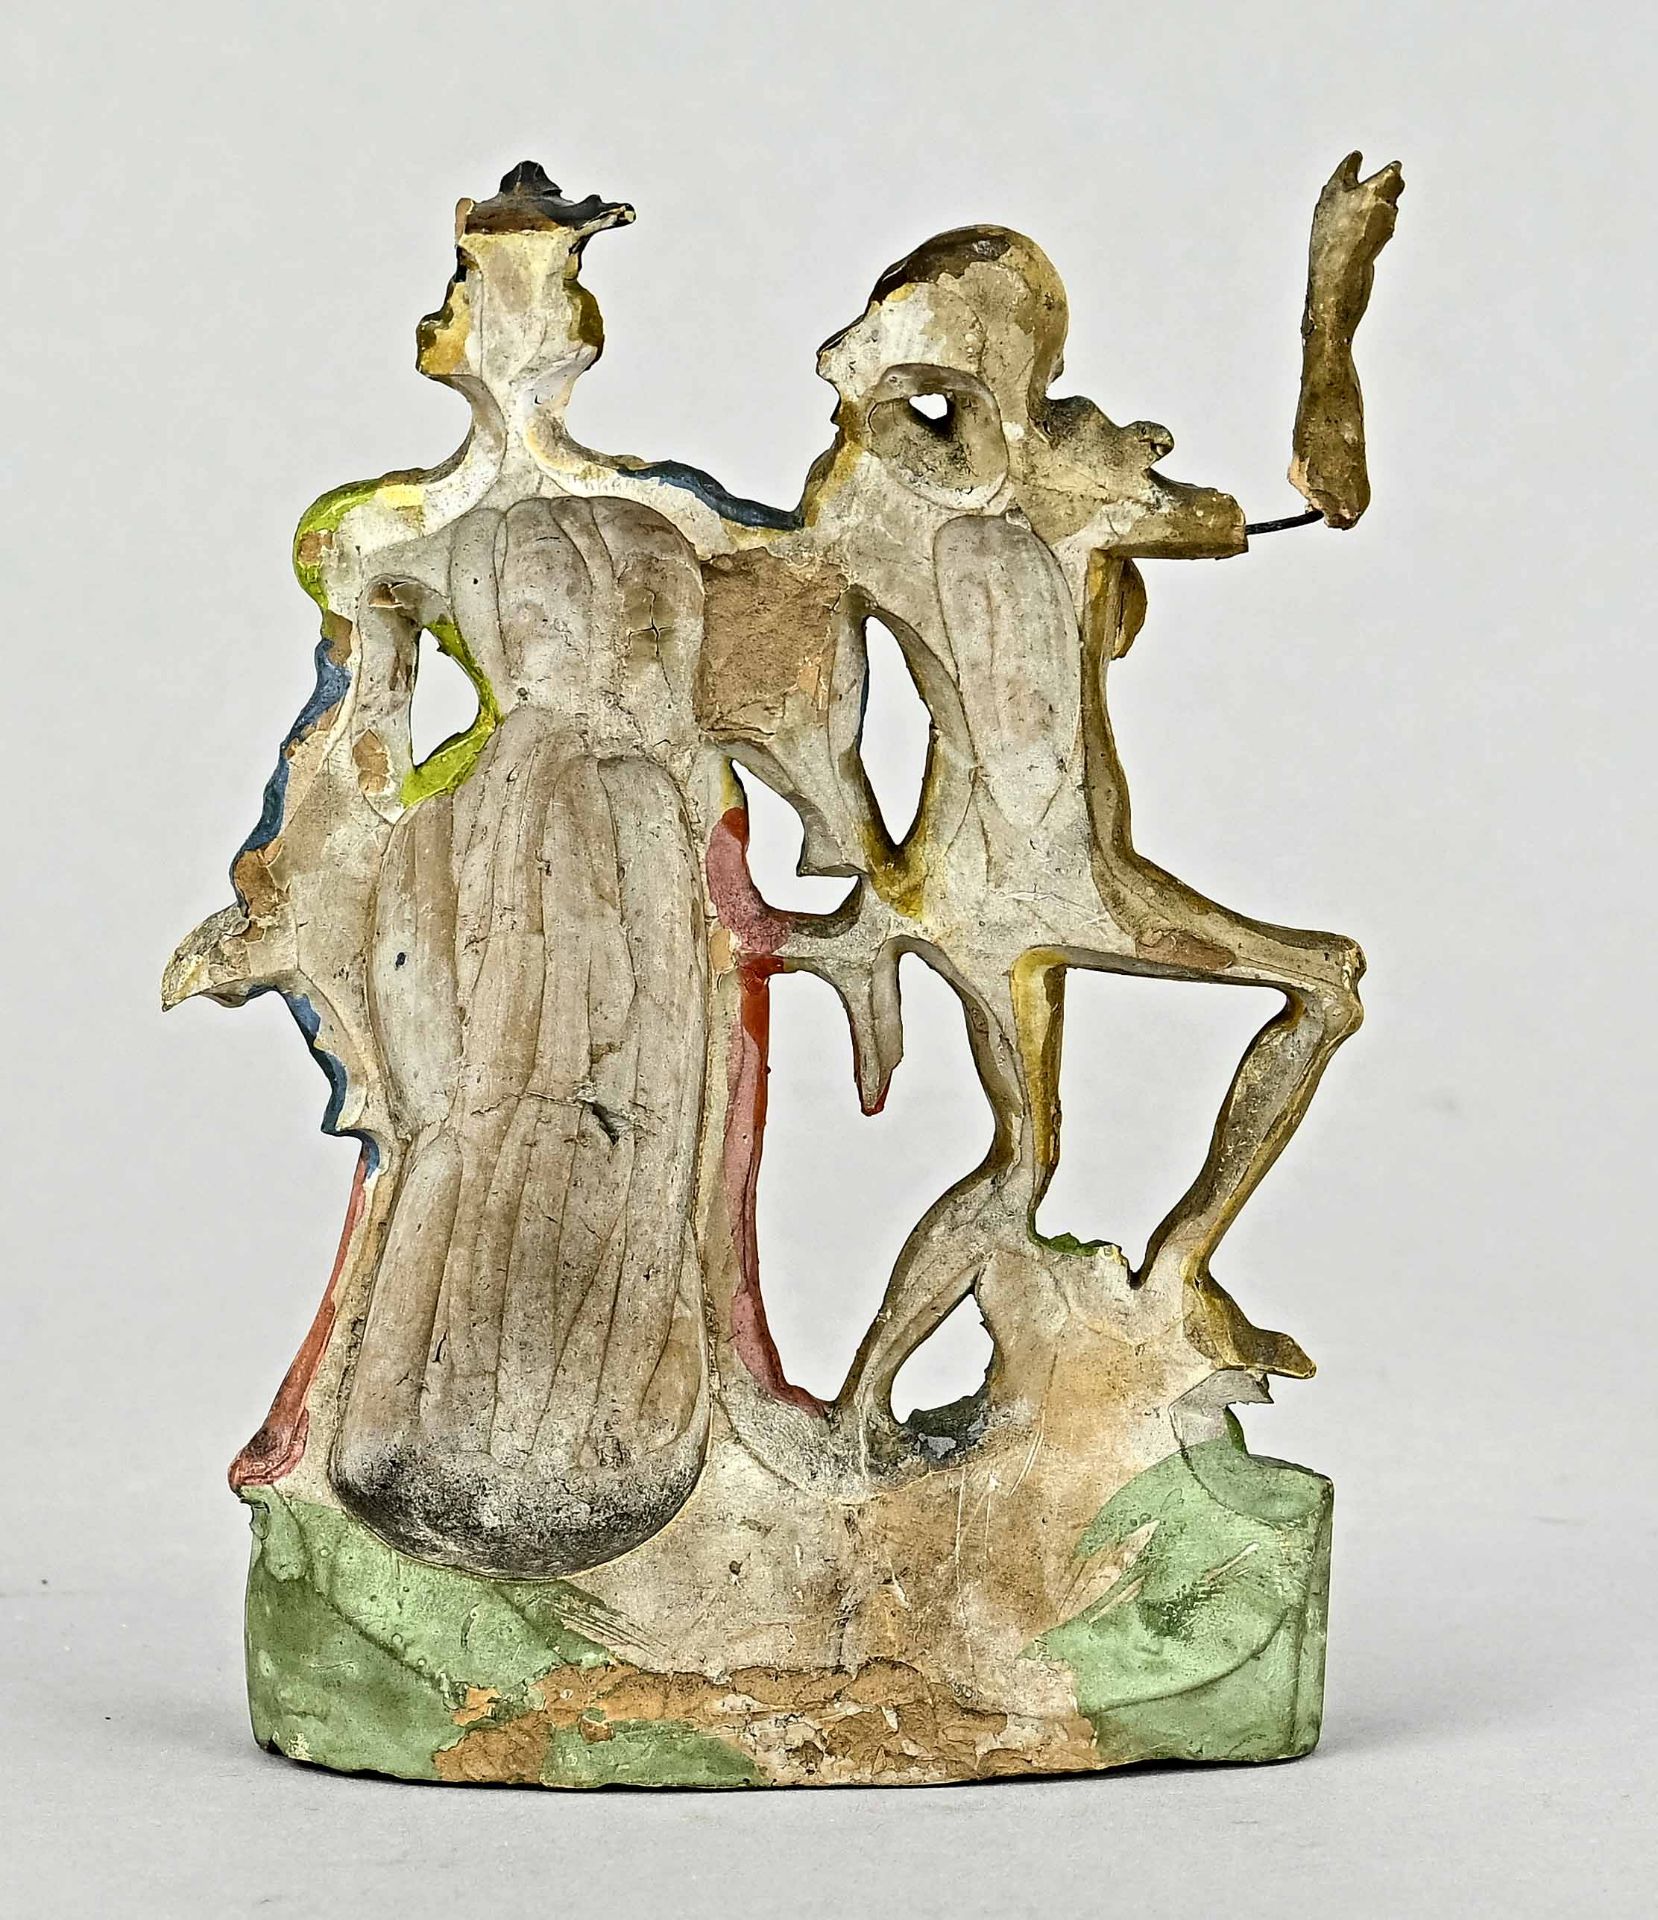 Zizenhausen figure, Basel, 19th century, "Totentanz" (Dance of Death) by Anton Sohn, colored clay,  - Image 2 of 3